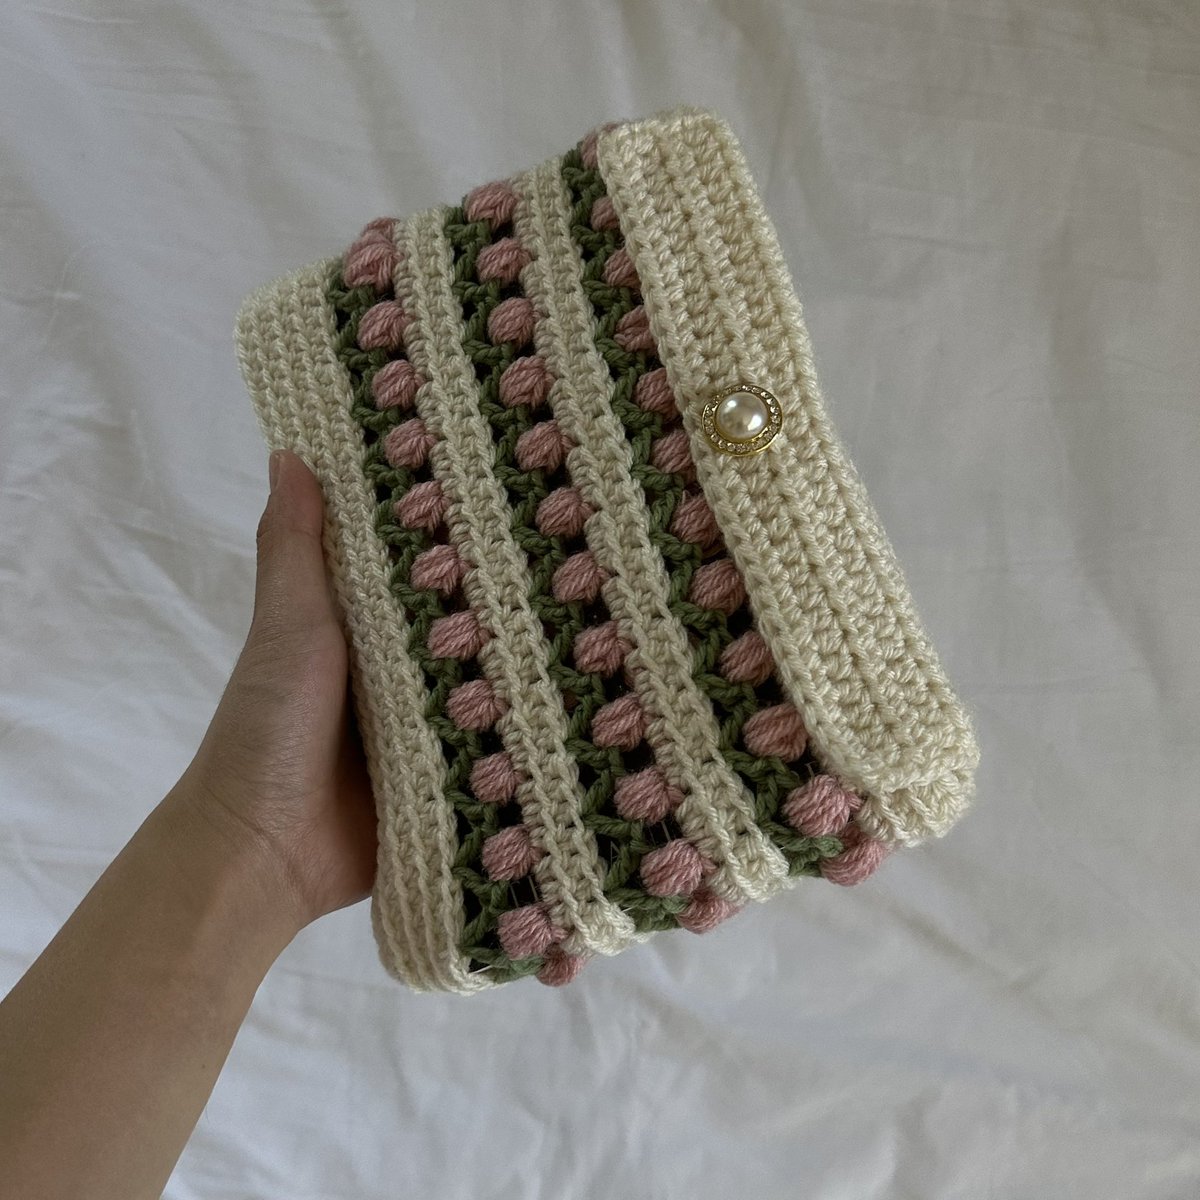 guys look at my new crocheted book sleeve it’s so perfect i’m obsessed!!!🌷🌷🌷